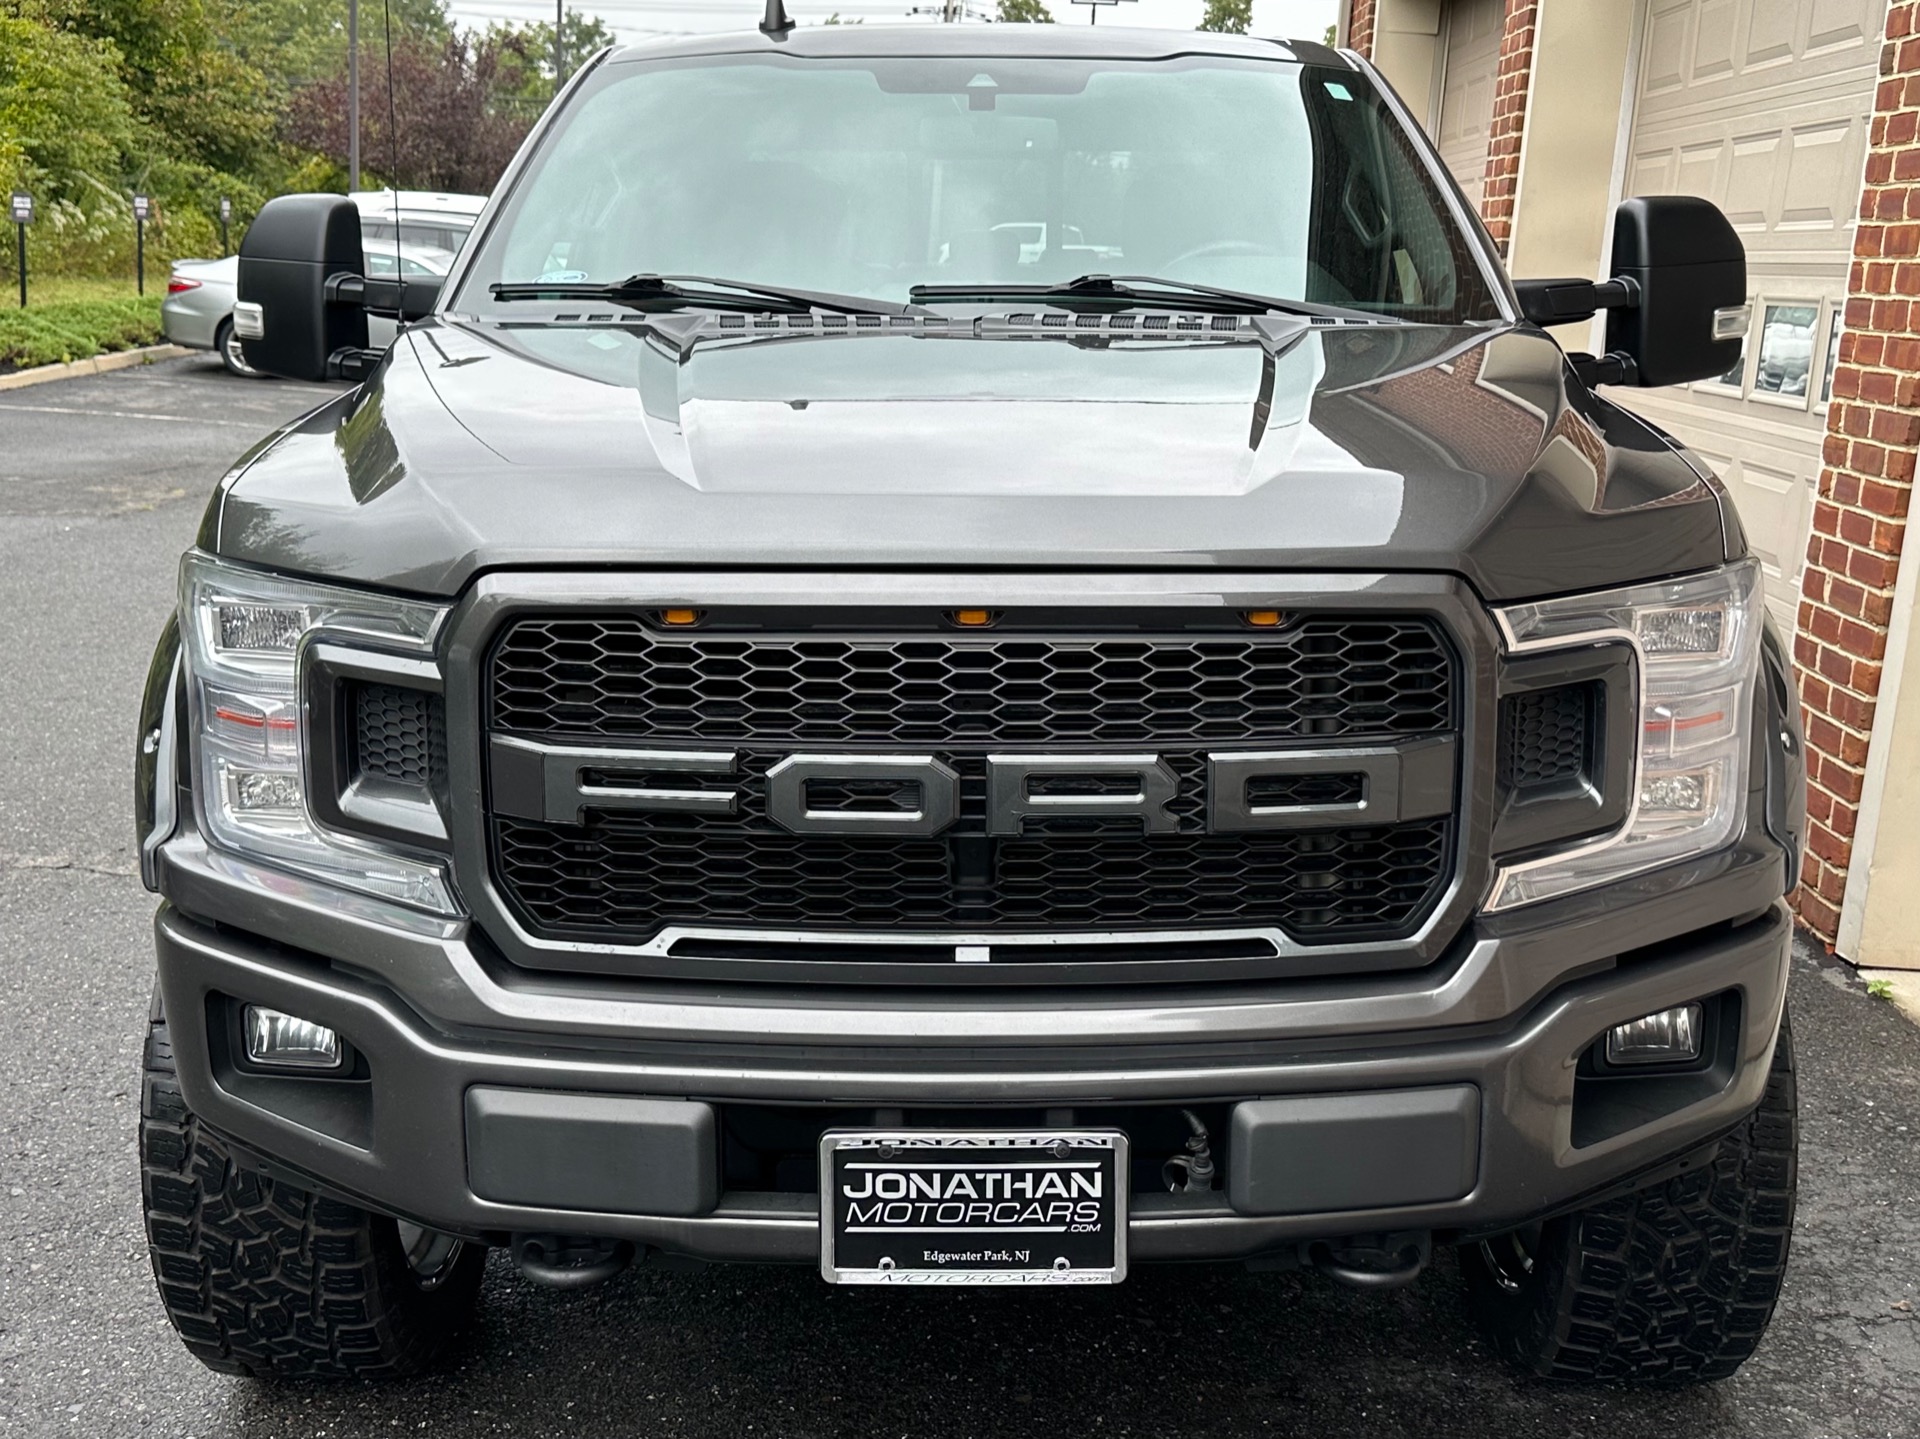 2020 Ford F-150 Lariat Stock # D69135 for sale near Edgewater Park, NJ ...